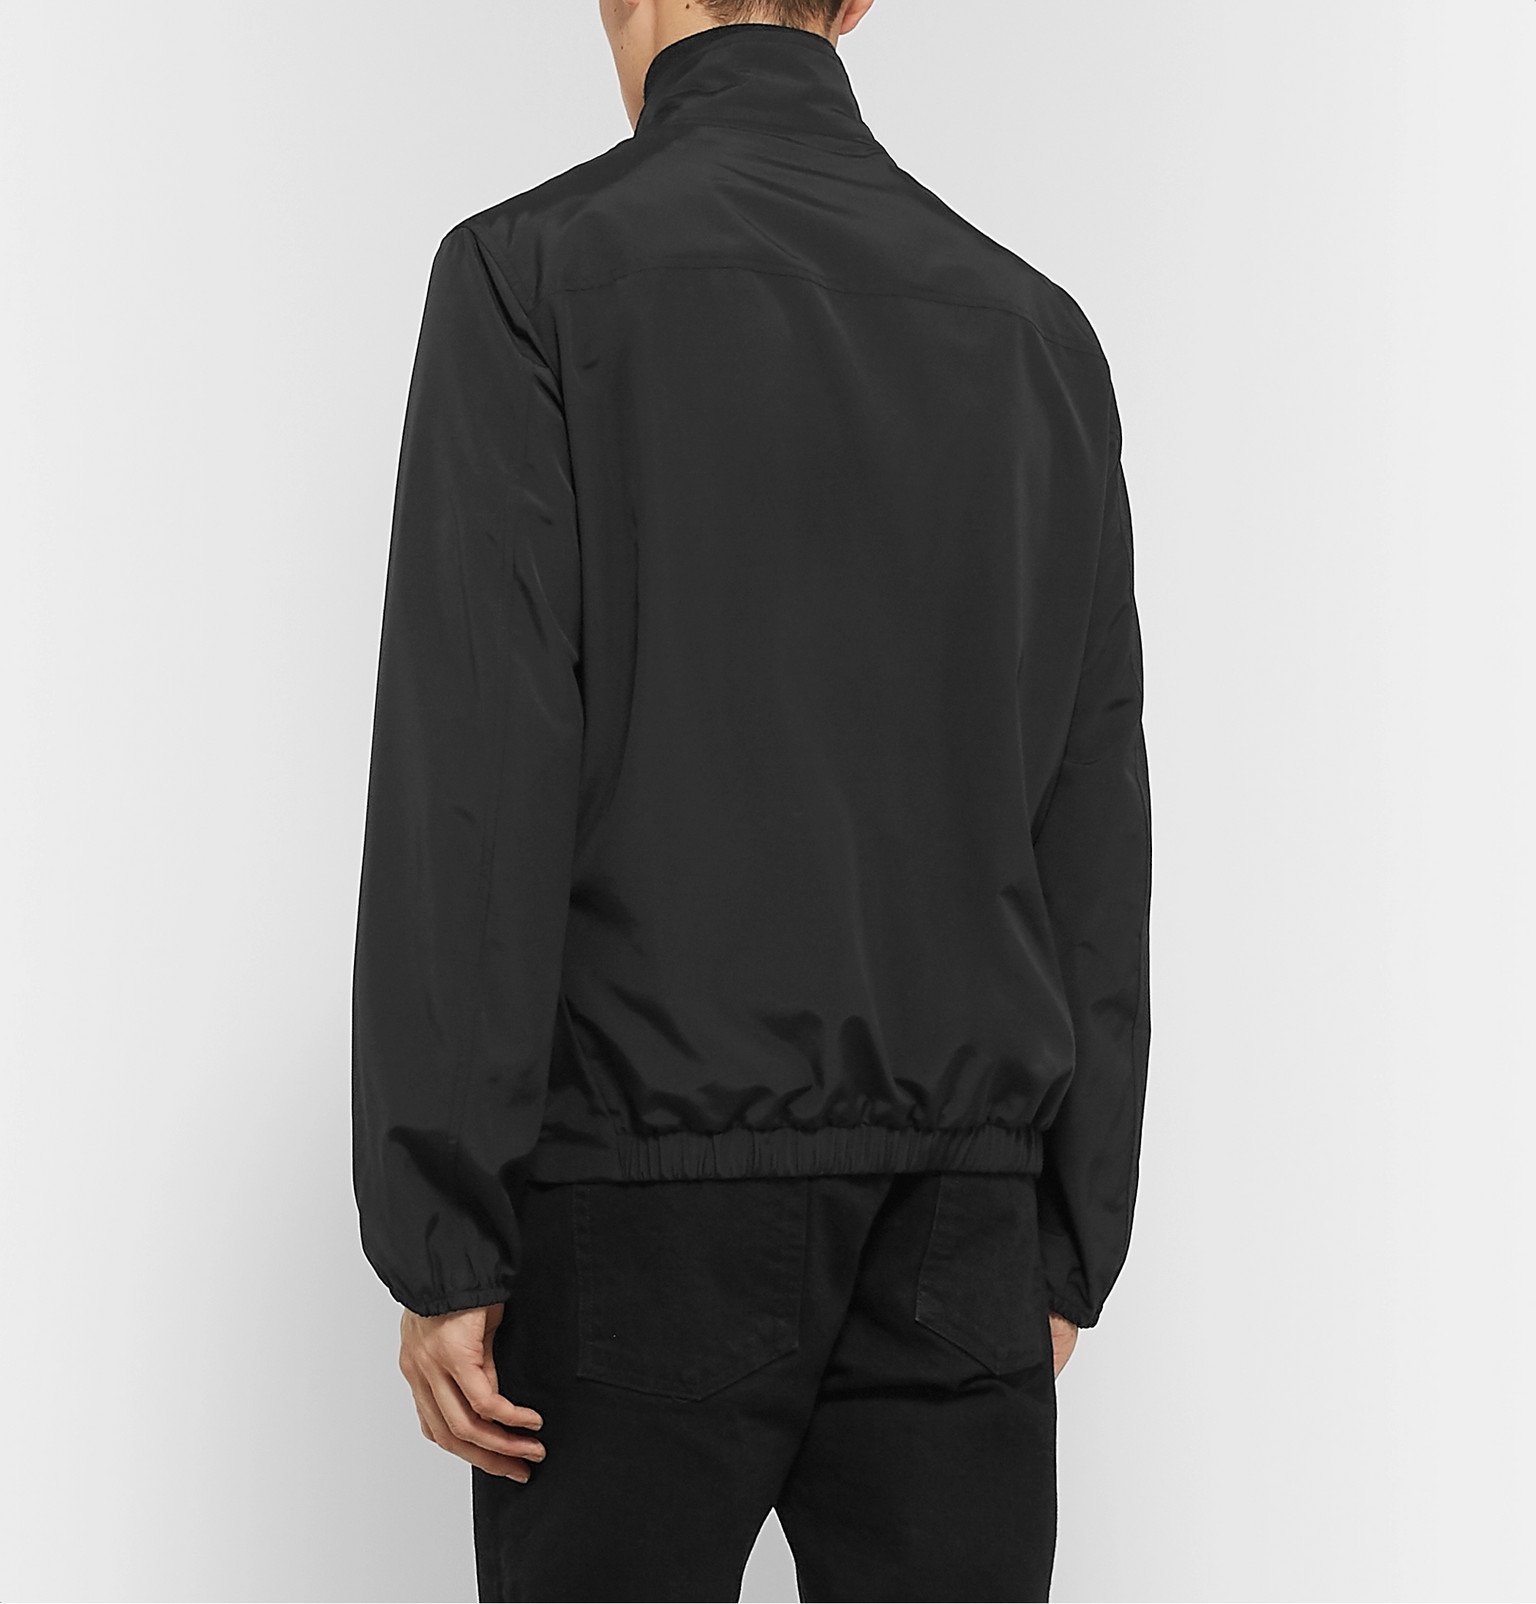 The Row - Leo Leather-Trimmed Wool-Blend Blouson Jacket - Black The Row